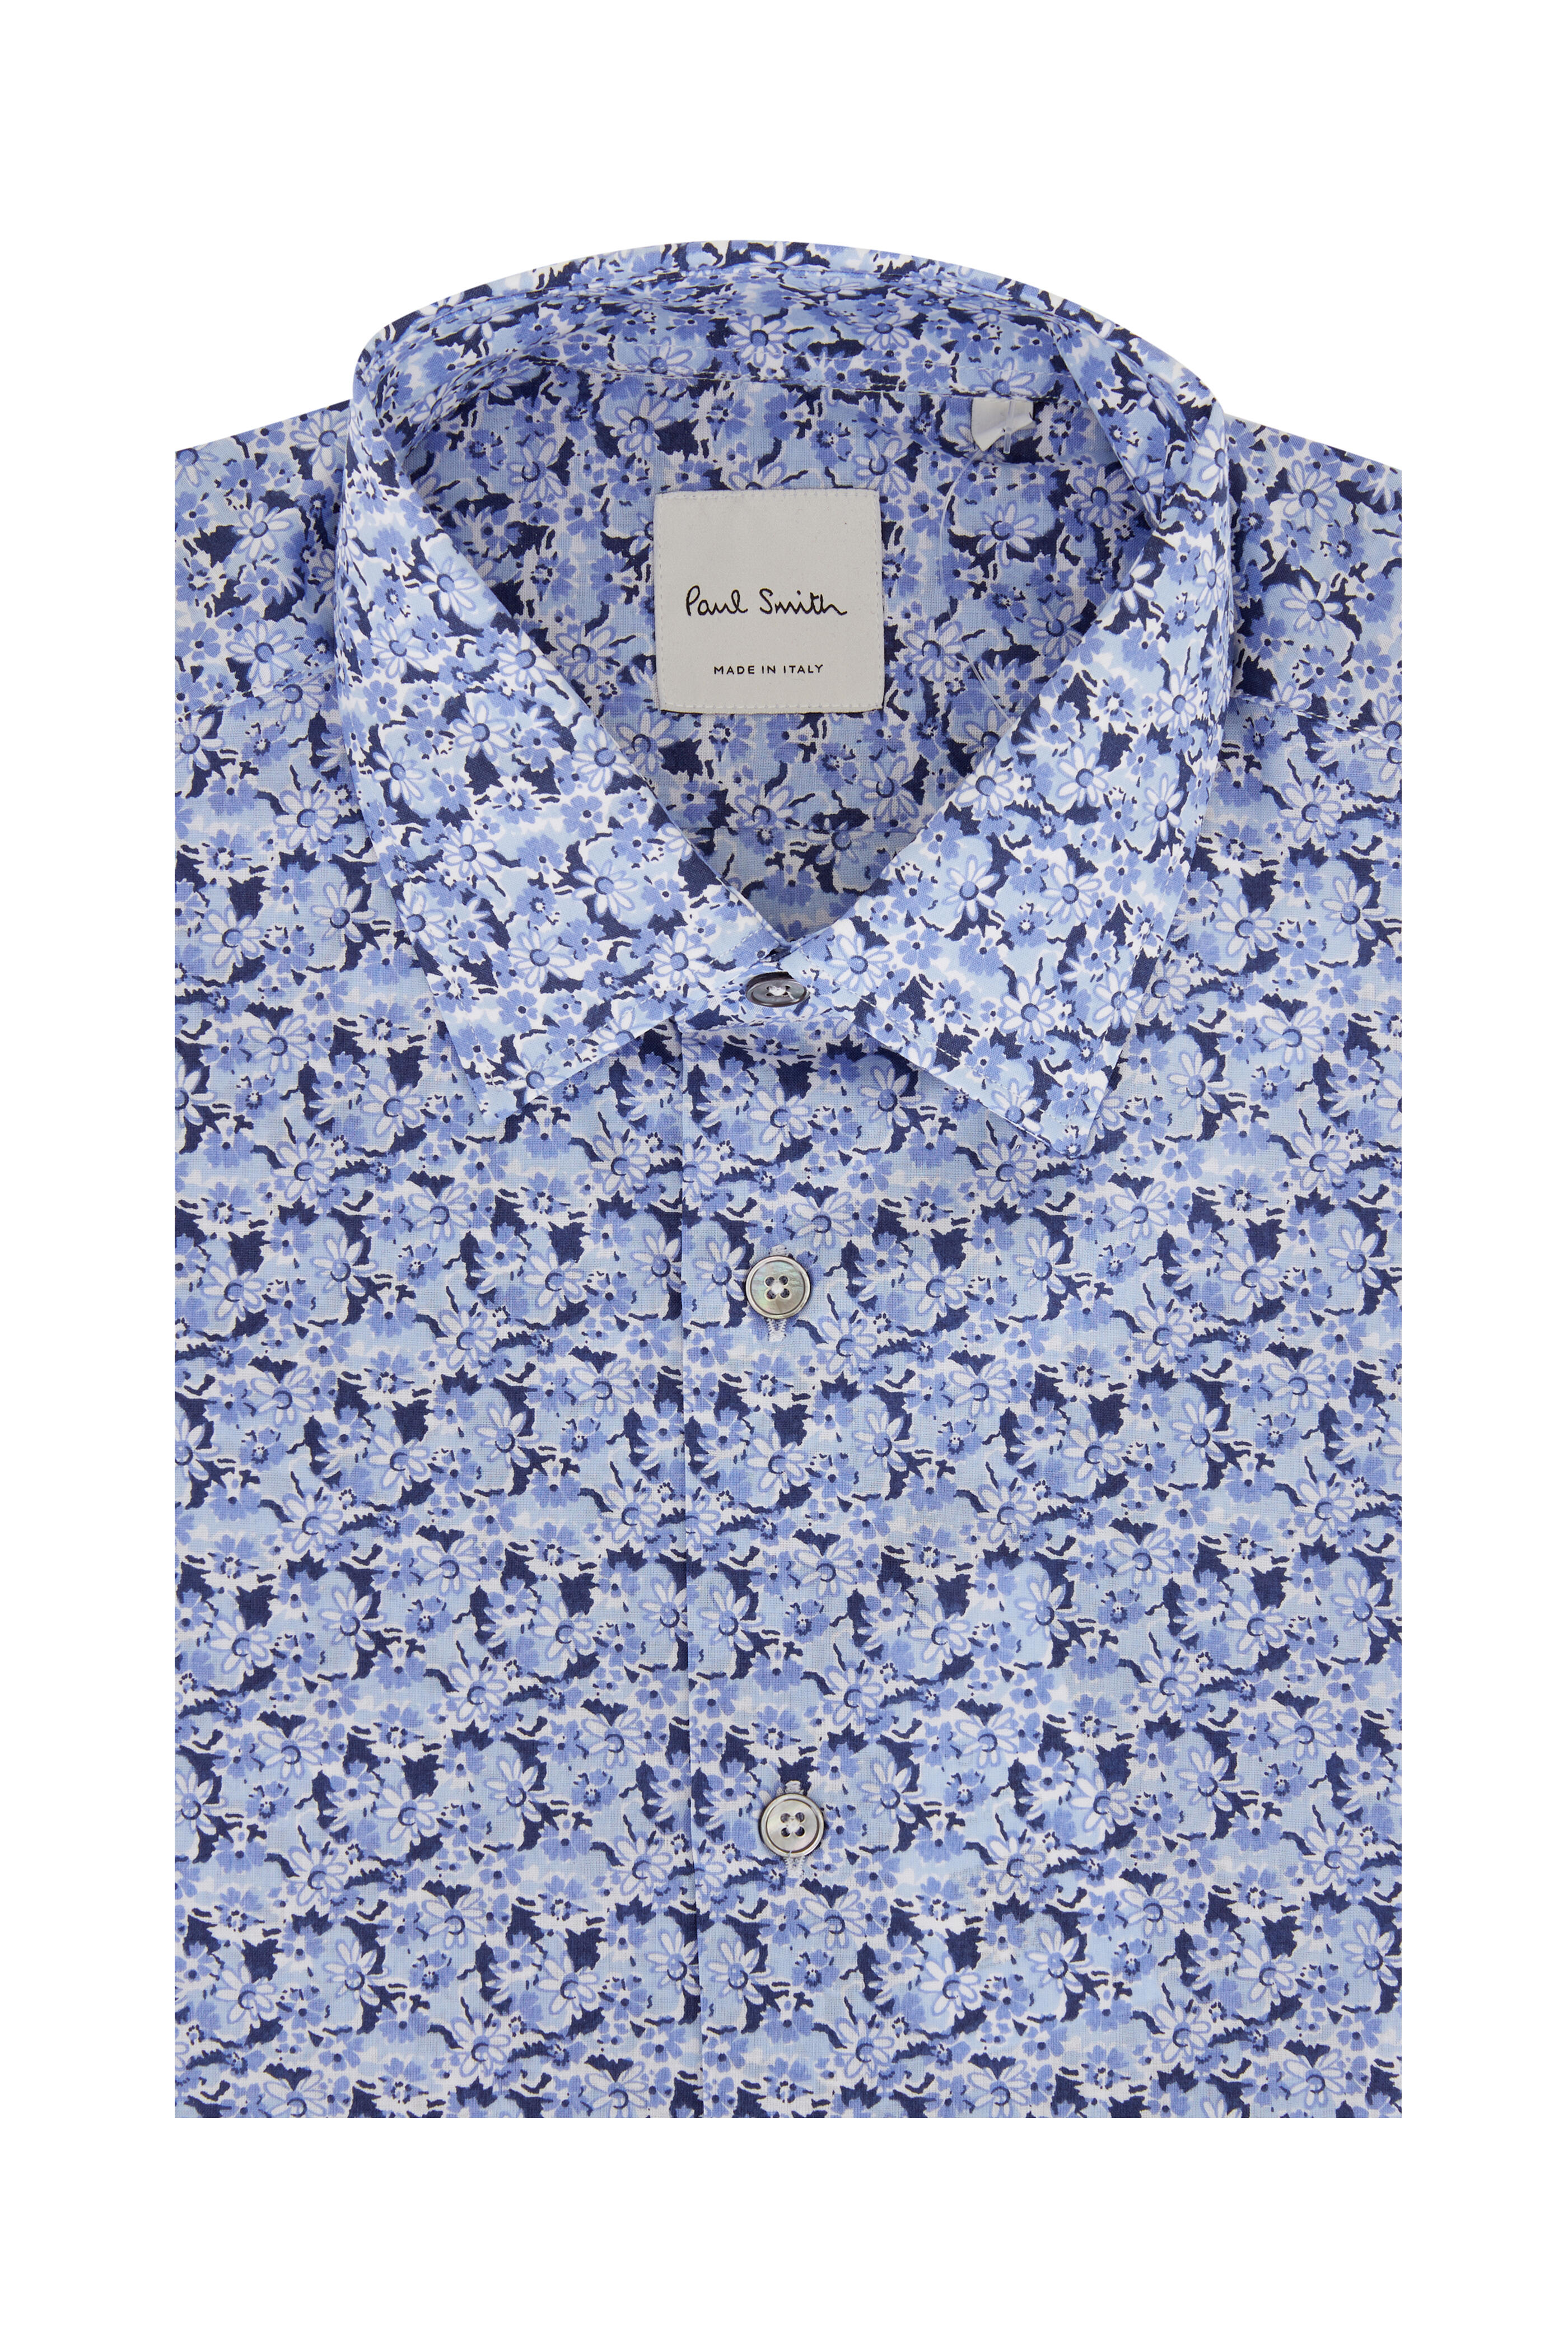 Paul Smith Cotton Small Floral-print Shirt in Brown for Men Mens Clothing Shirts Casual shirts and button-up shirts 